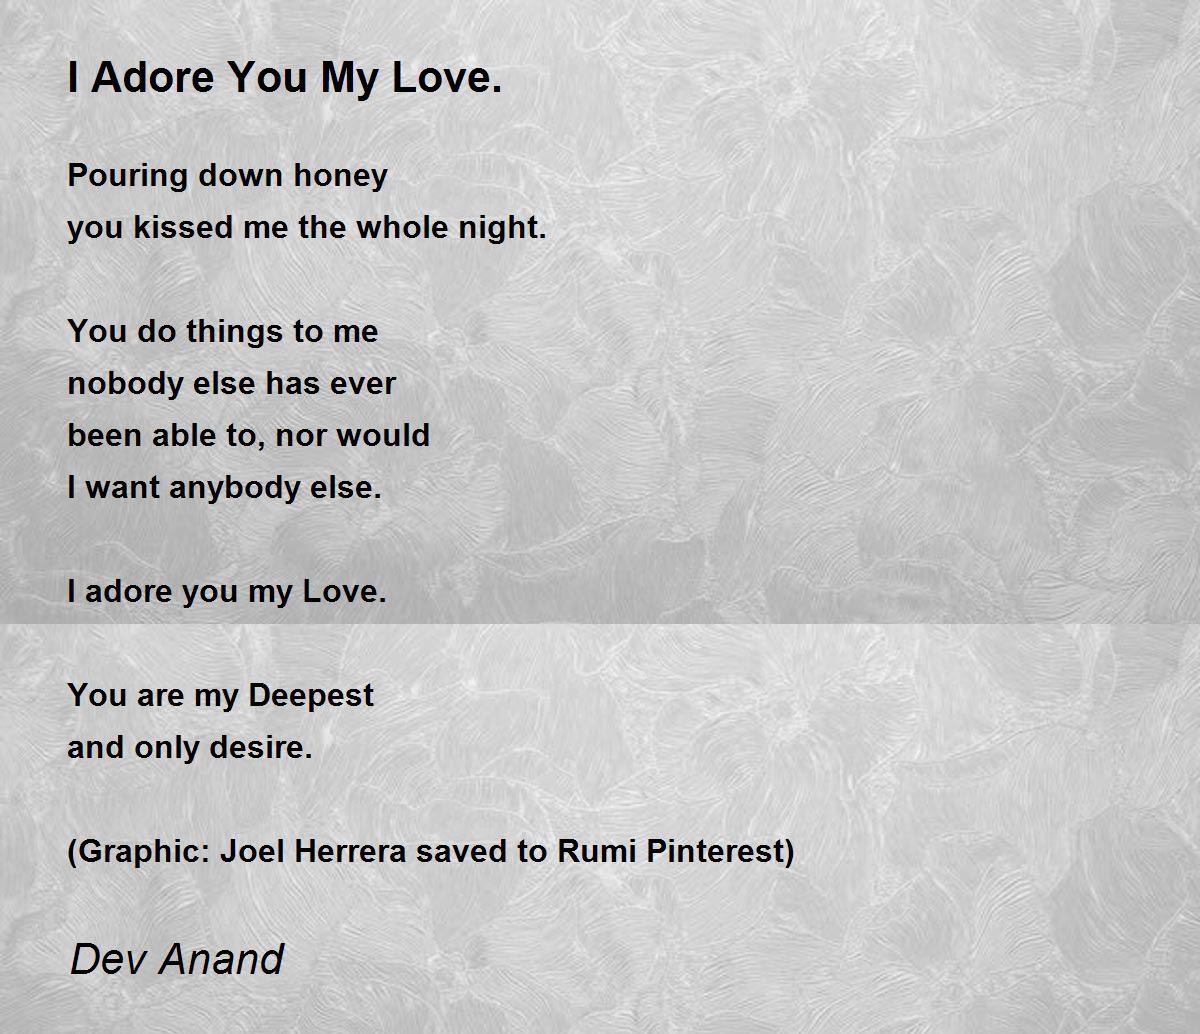 I Adore You My Love. - I Adore You My Love. Poem by Dev Anand